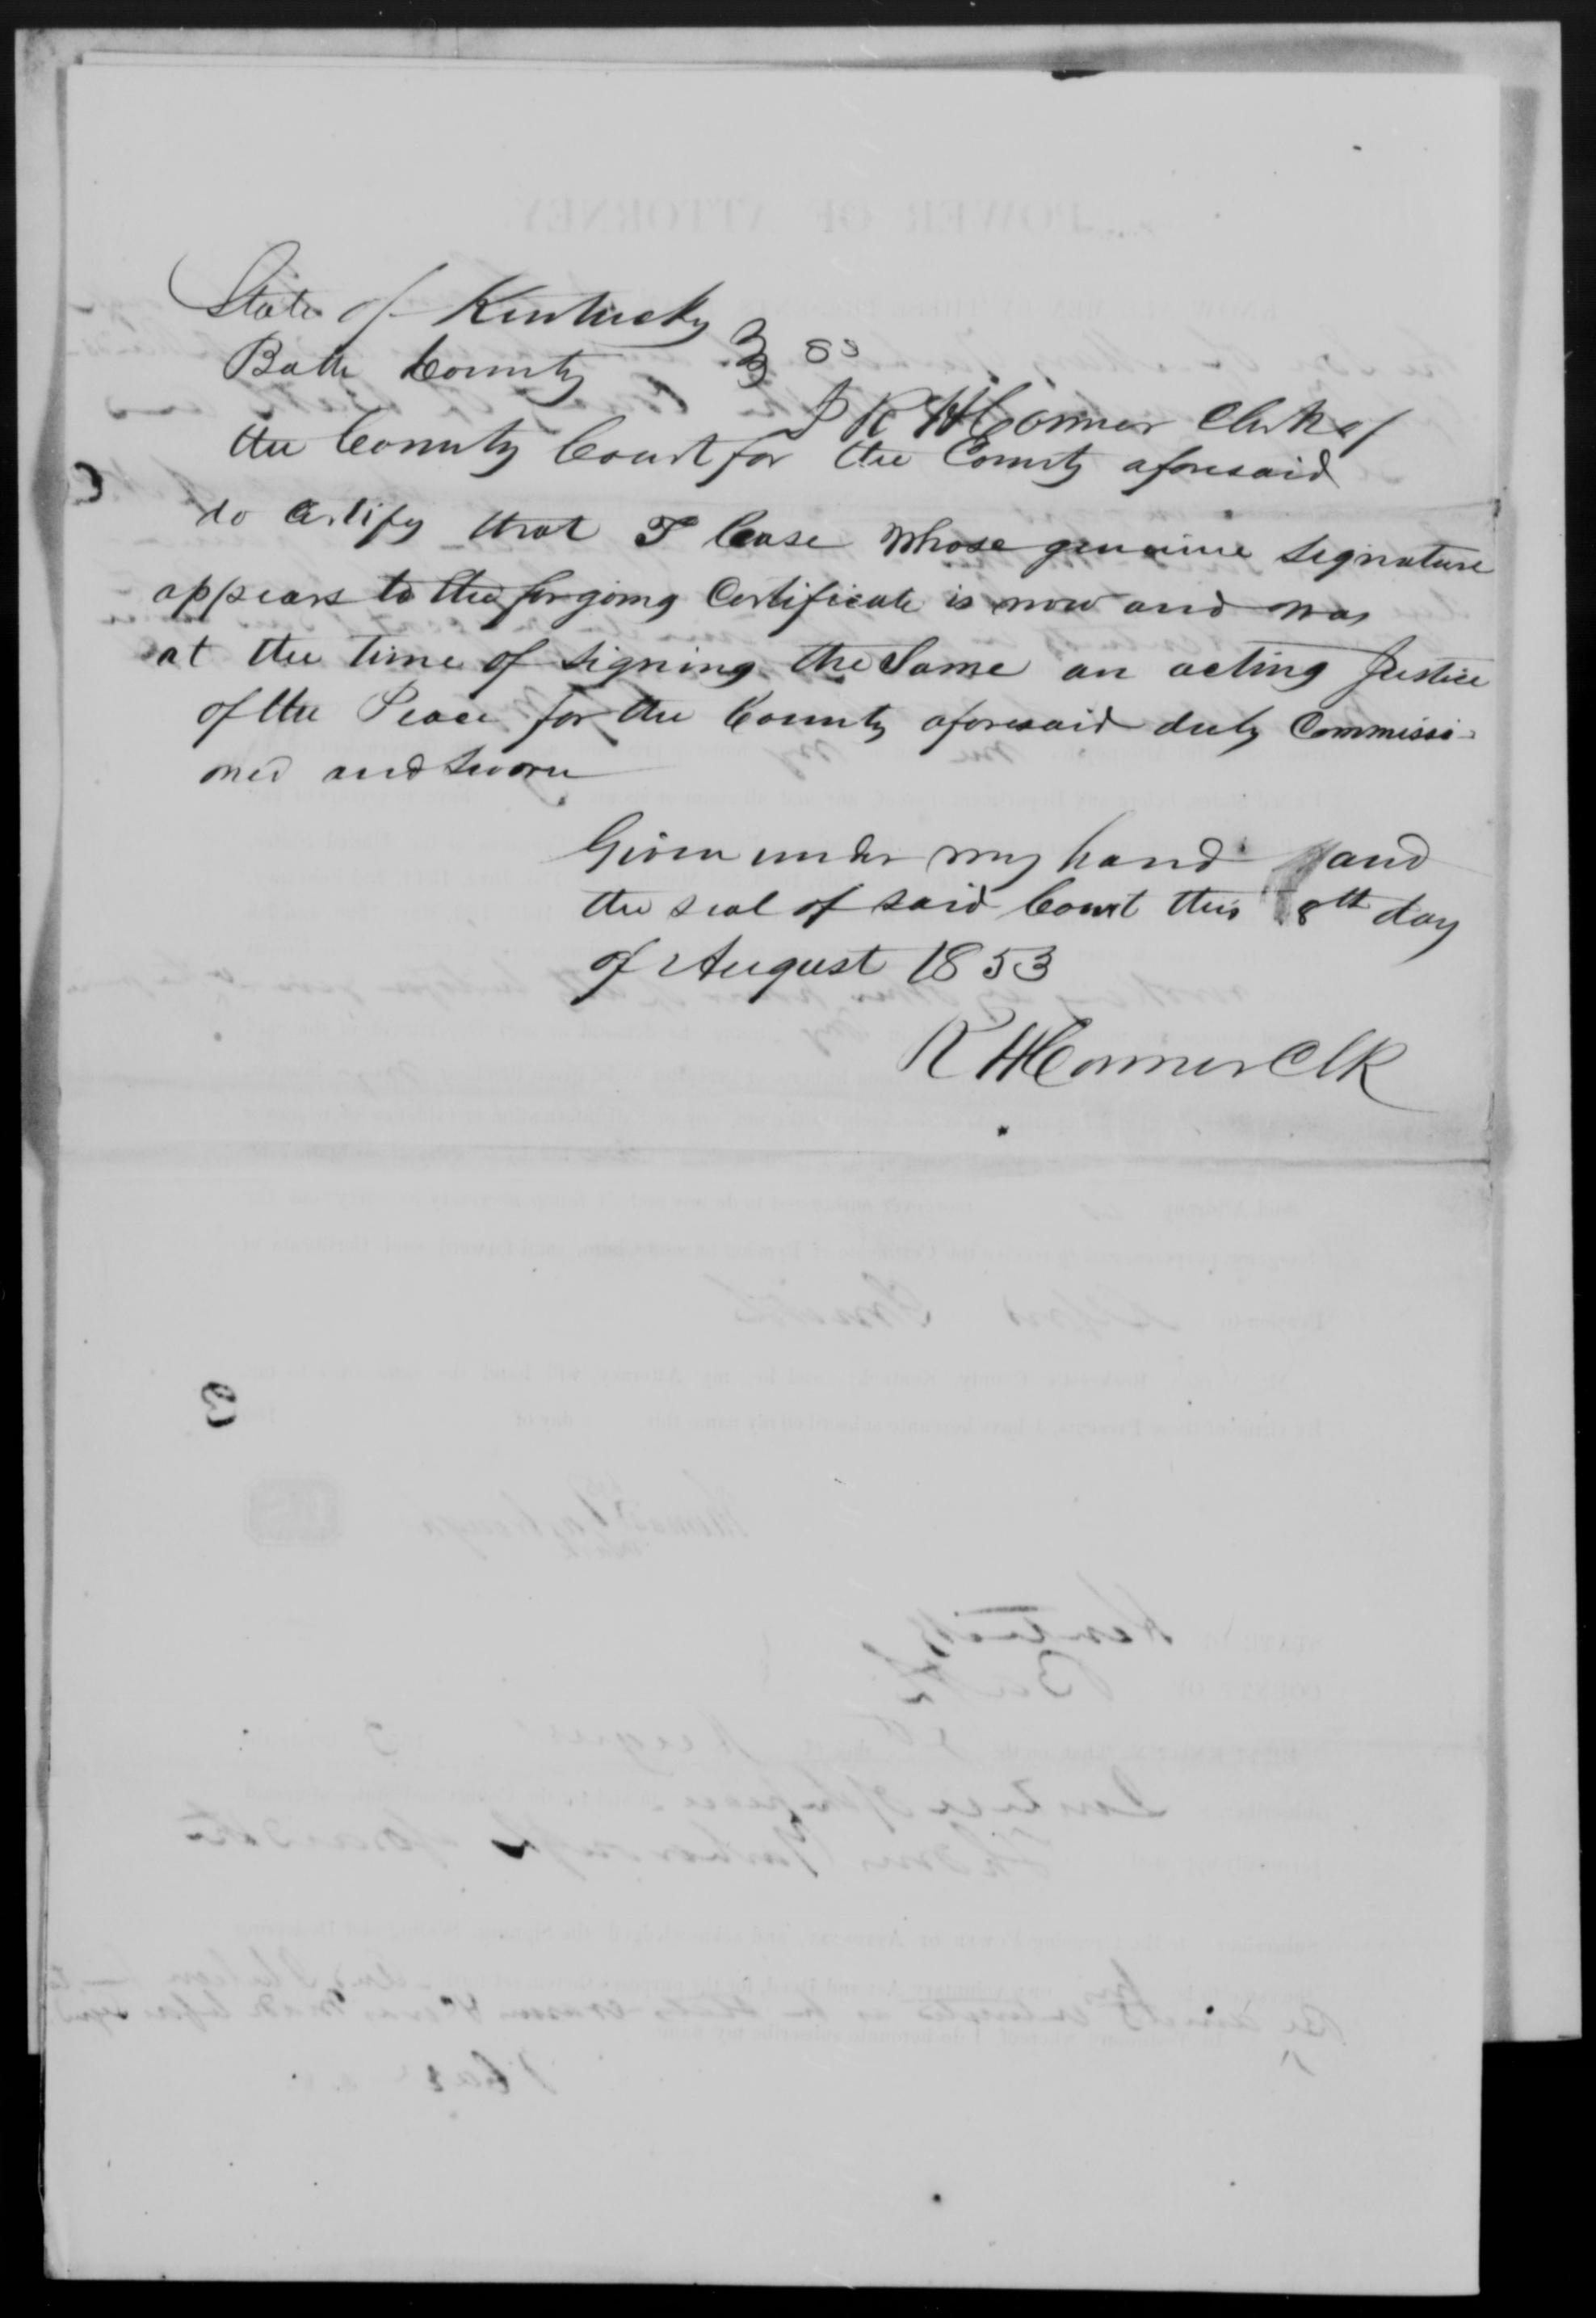 Appointment of John M. McCalla and A. H. Markland as Thomas Yarborough's Power of Attorney, 8 August 1853, page 2